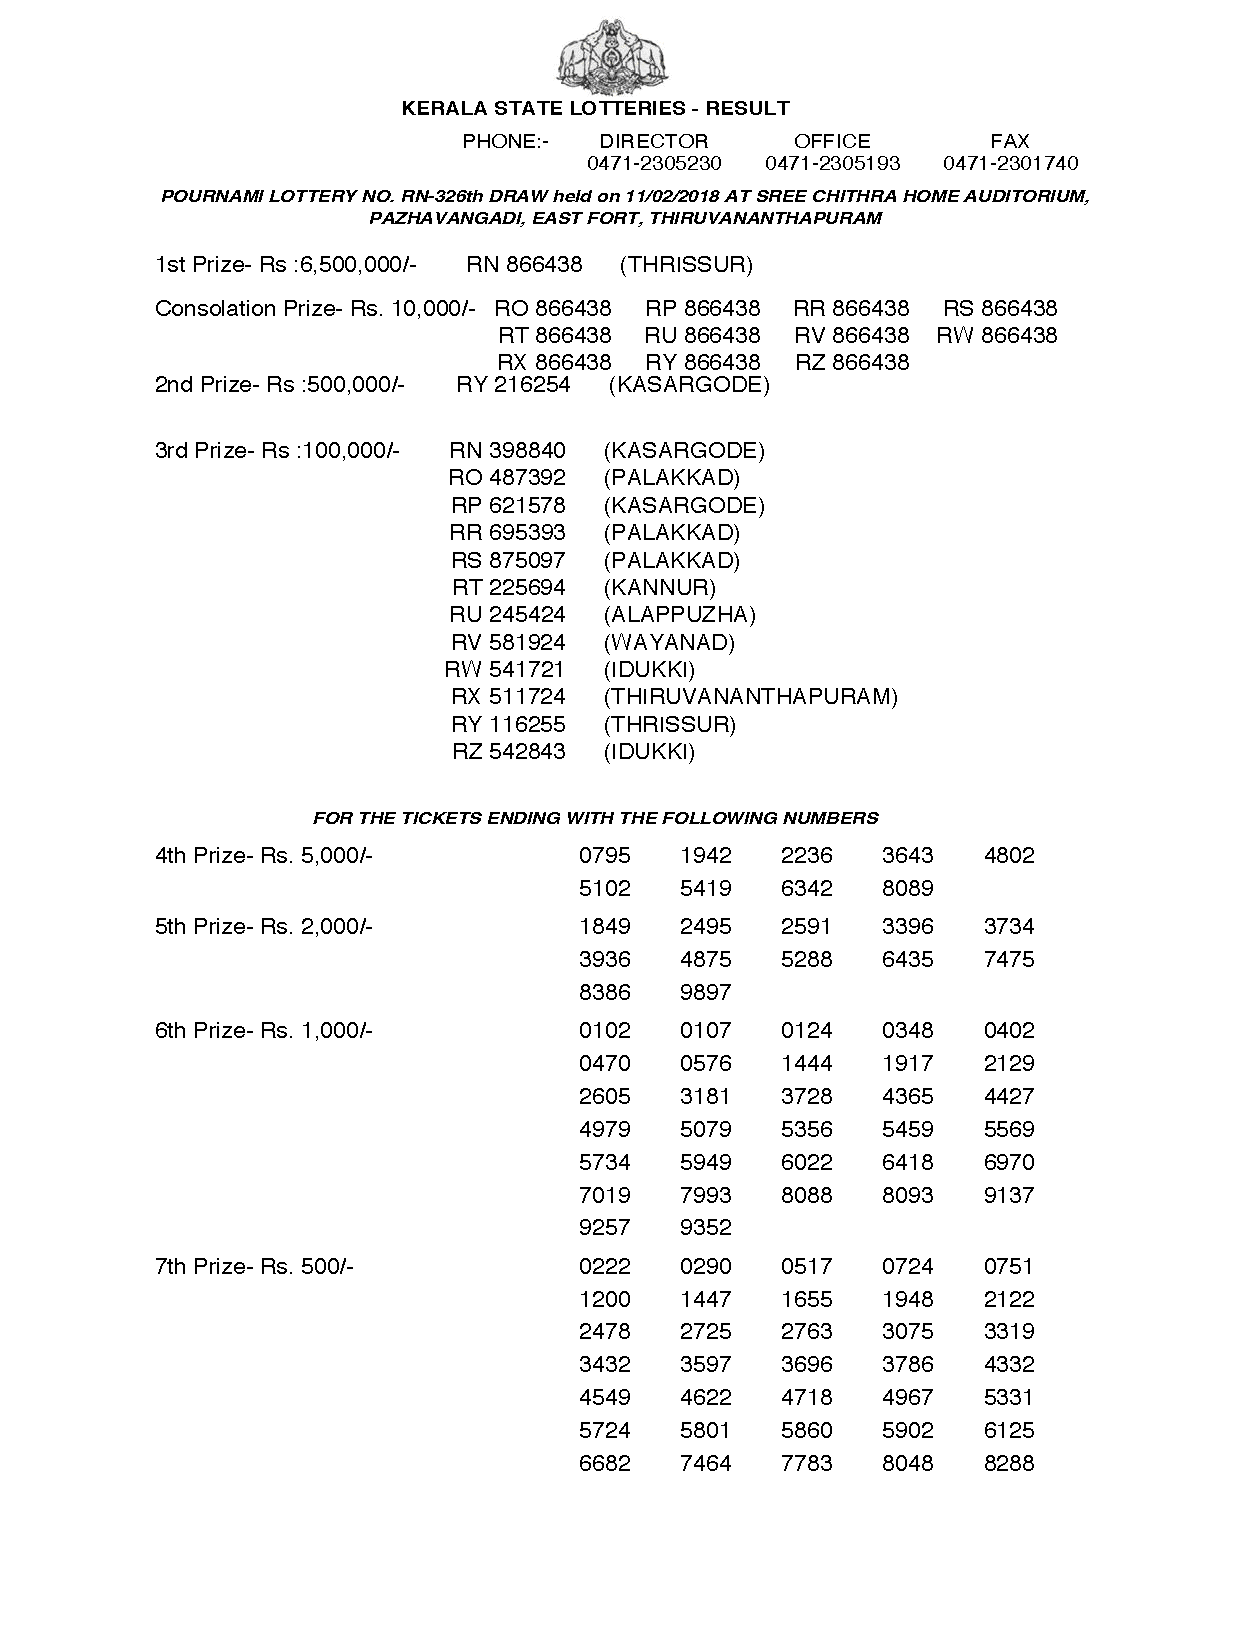 Pournami RN 326 Kerala Lottery Results Image: Page 1